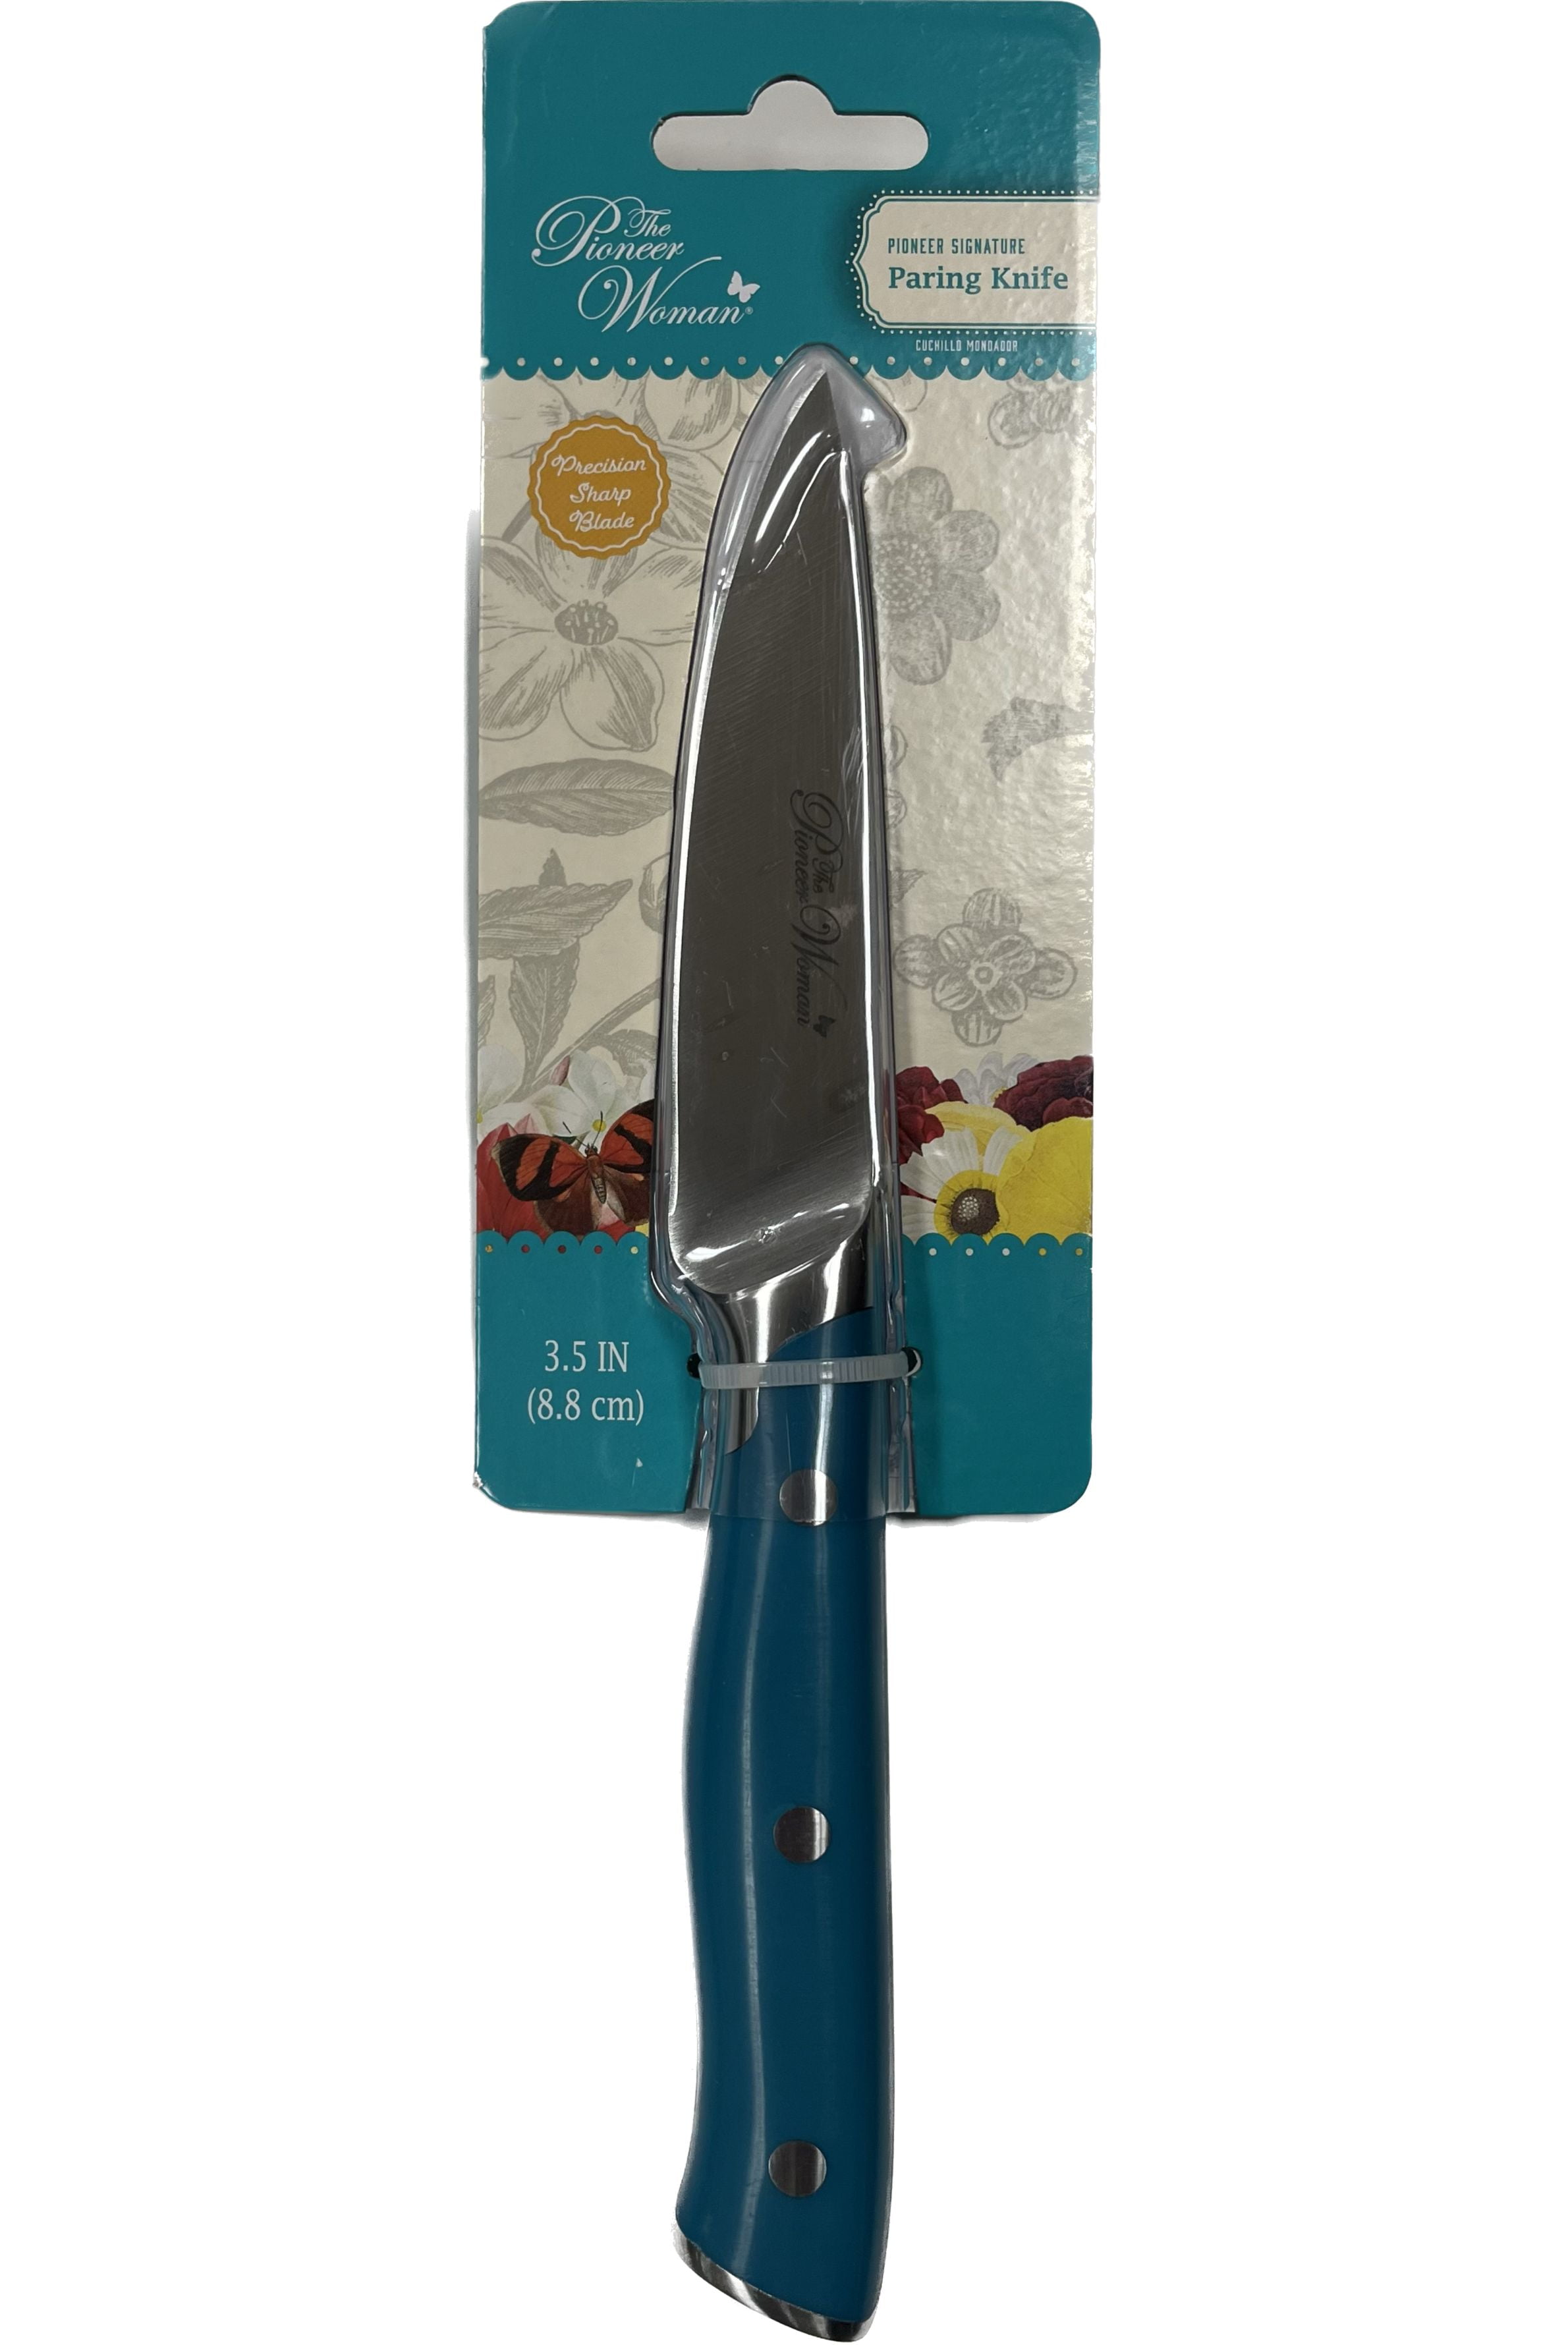 Save on ChefSelect Paring Knife 3 Inch Order Online Delivery